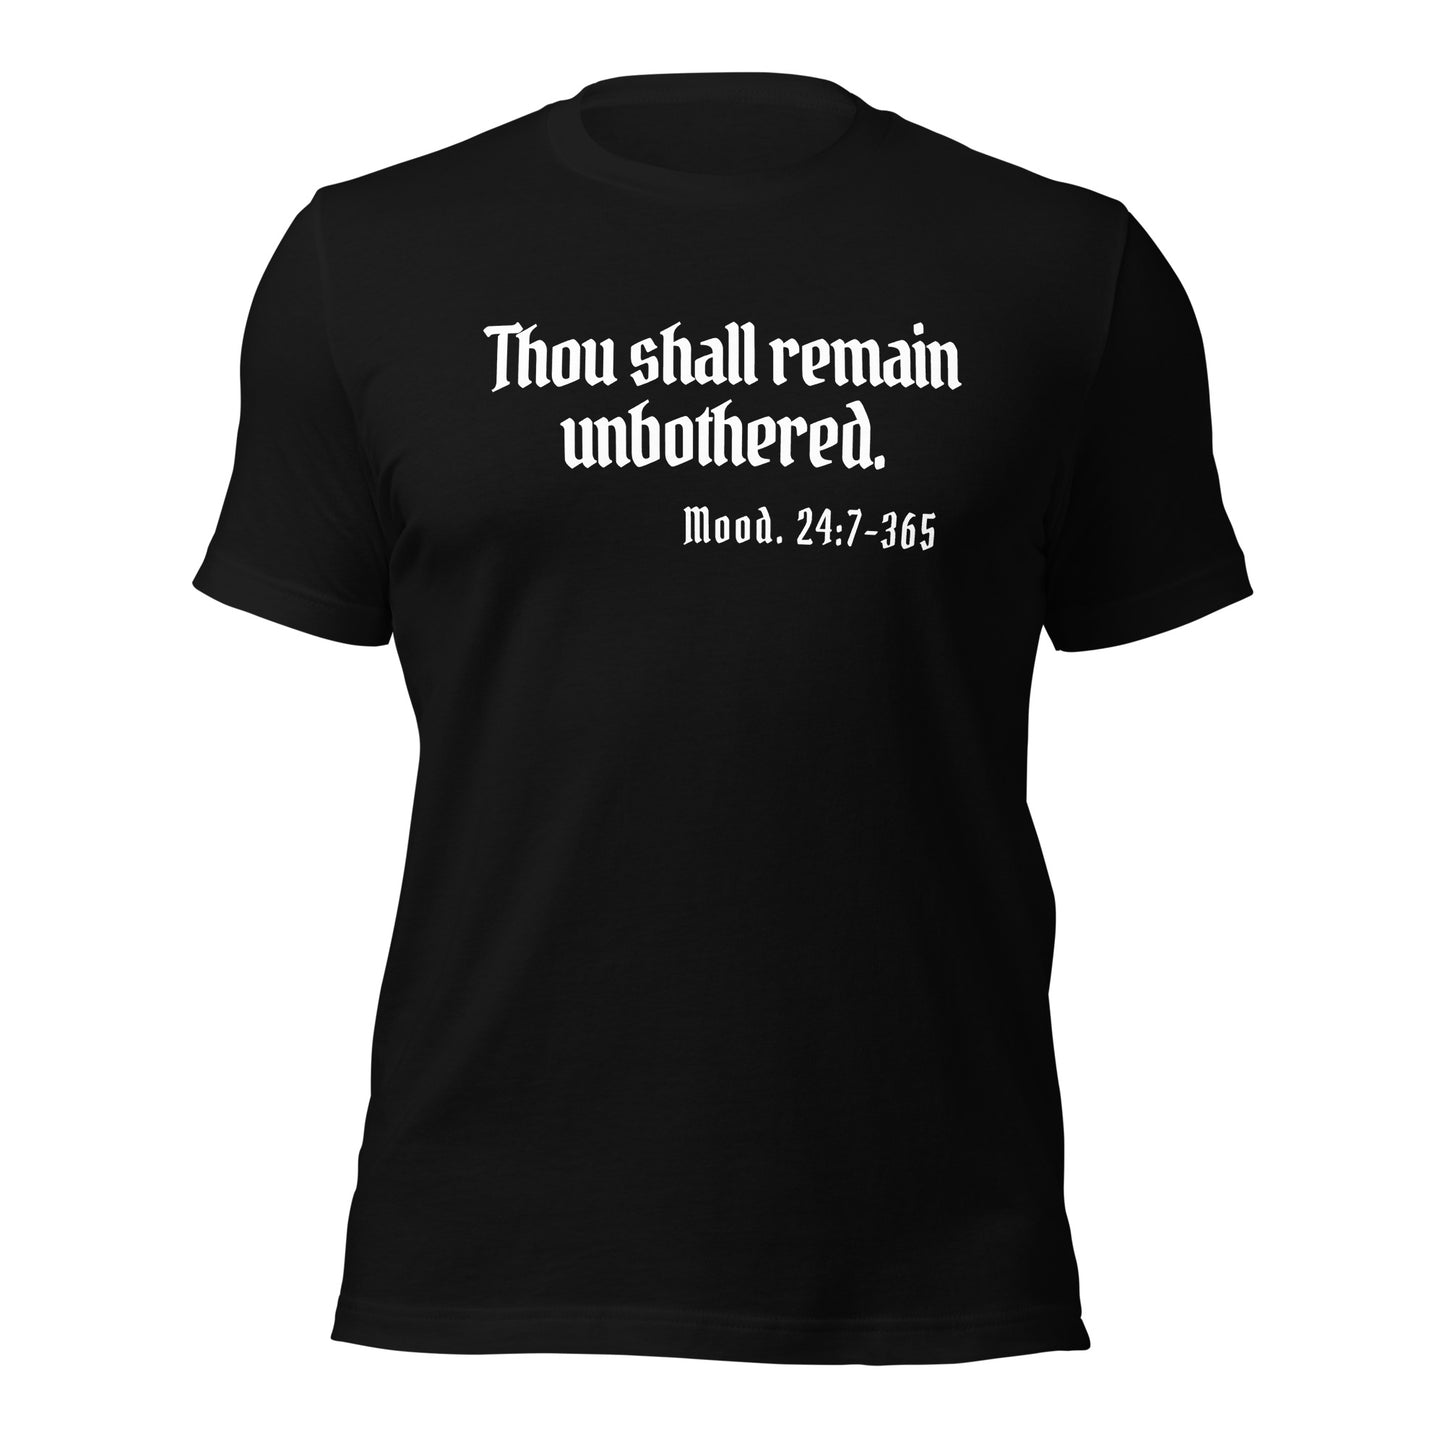 Unbothered T-shirt